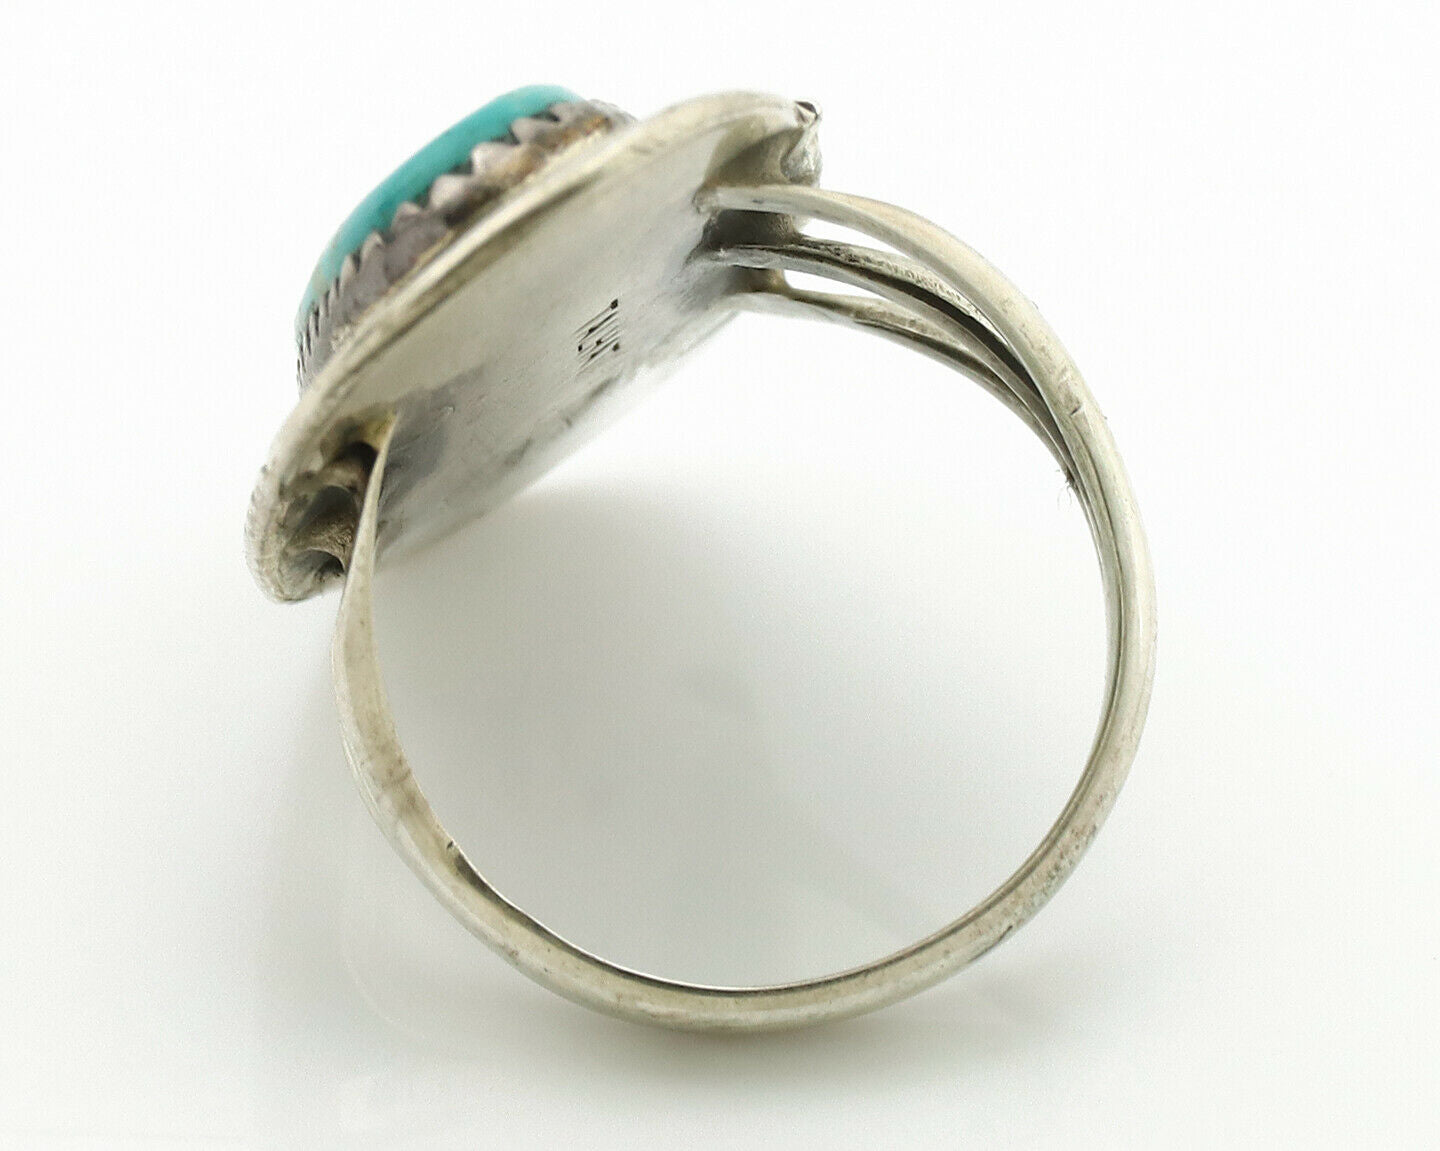 Navajo Ring .925 Silver Natural Blue Turquoise Artist Signed Talhat C.1980's